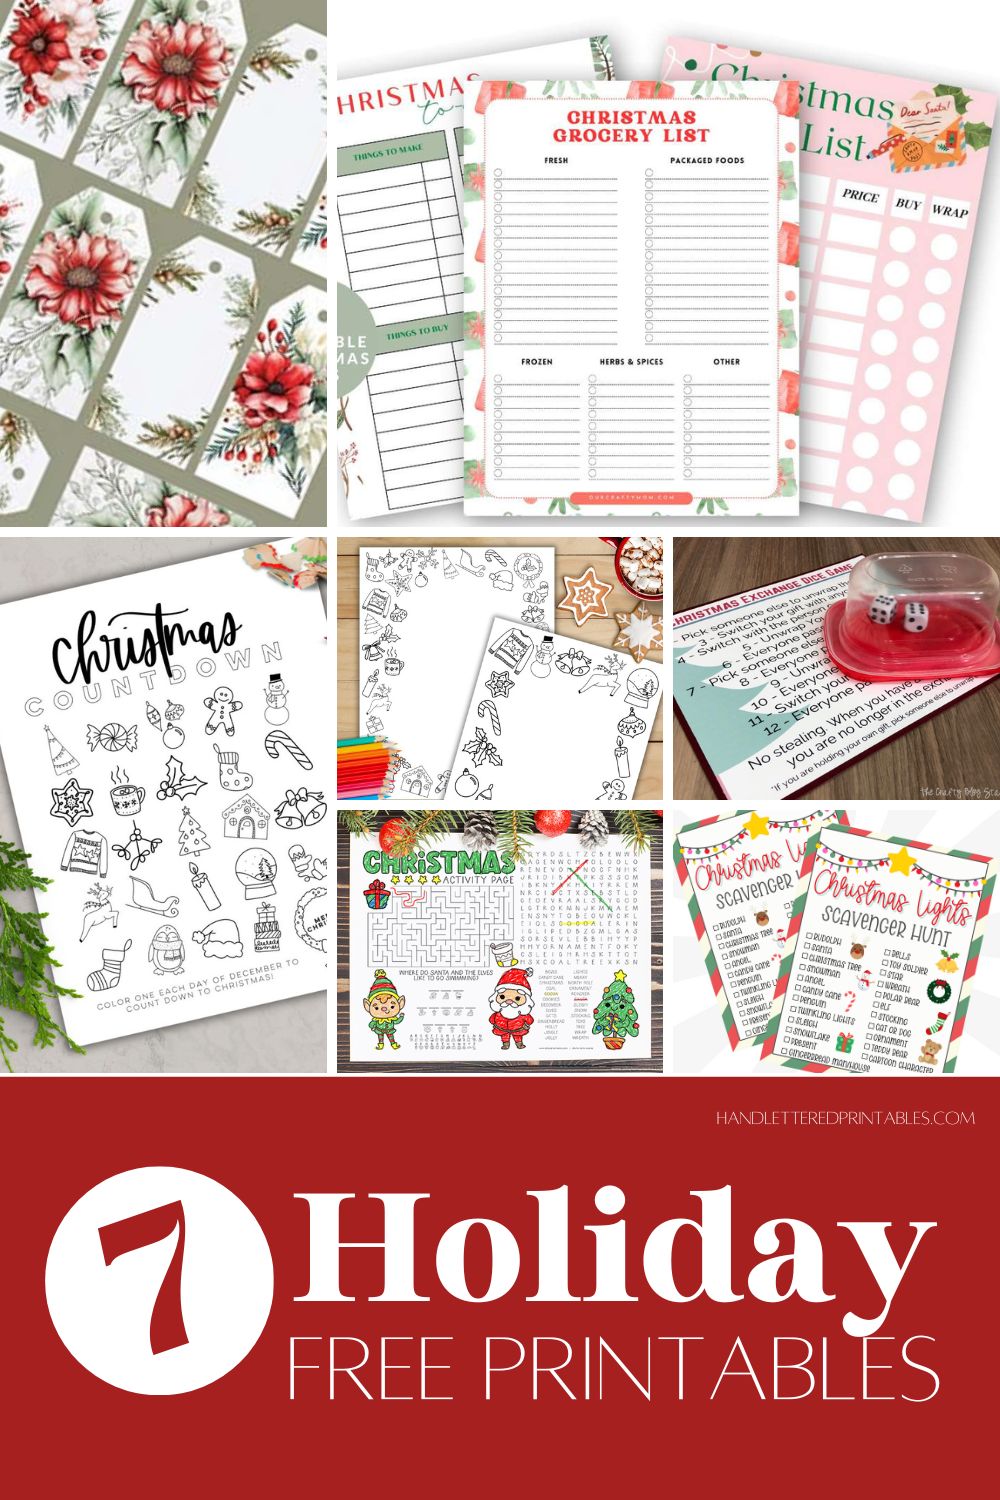 7 free printables for the holidays